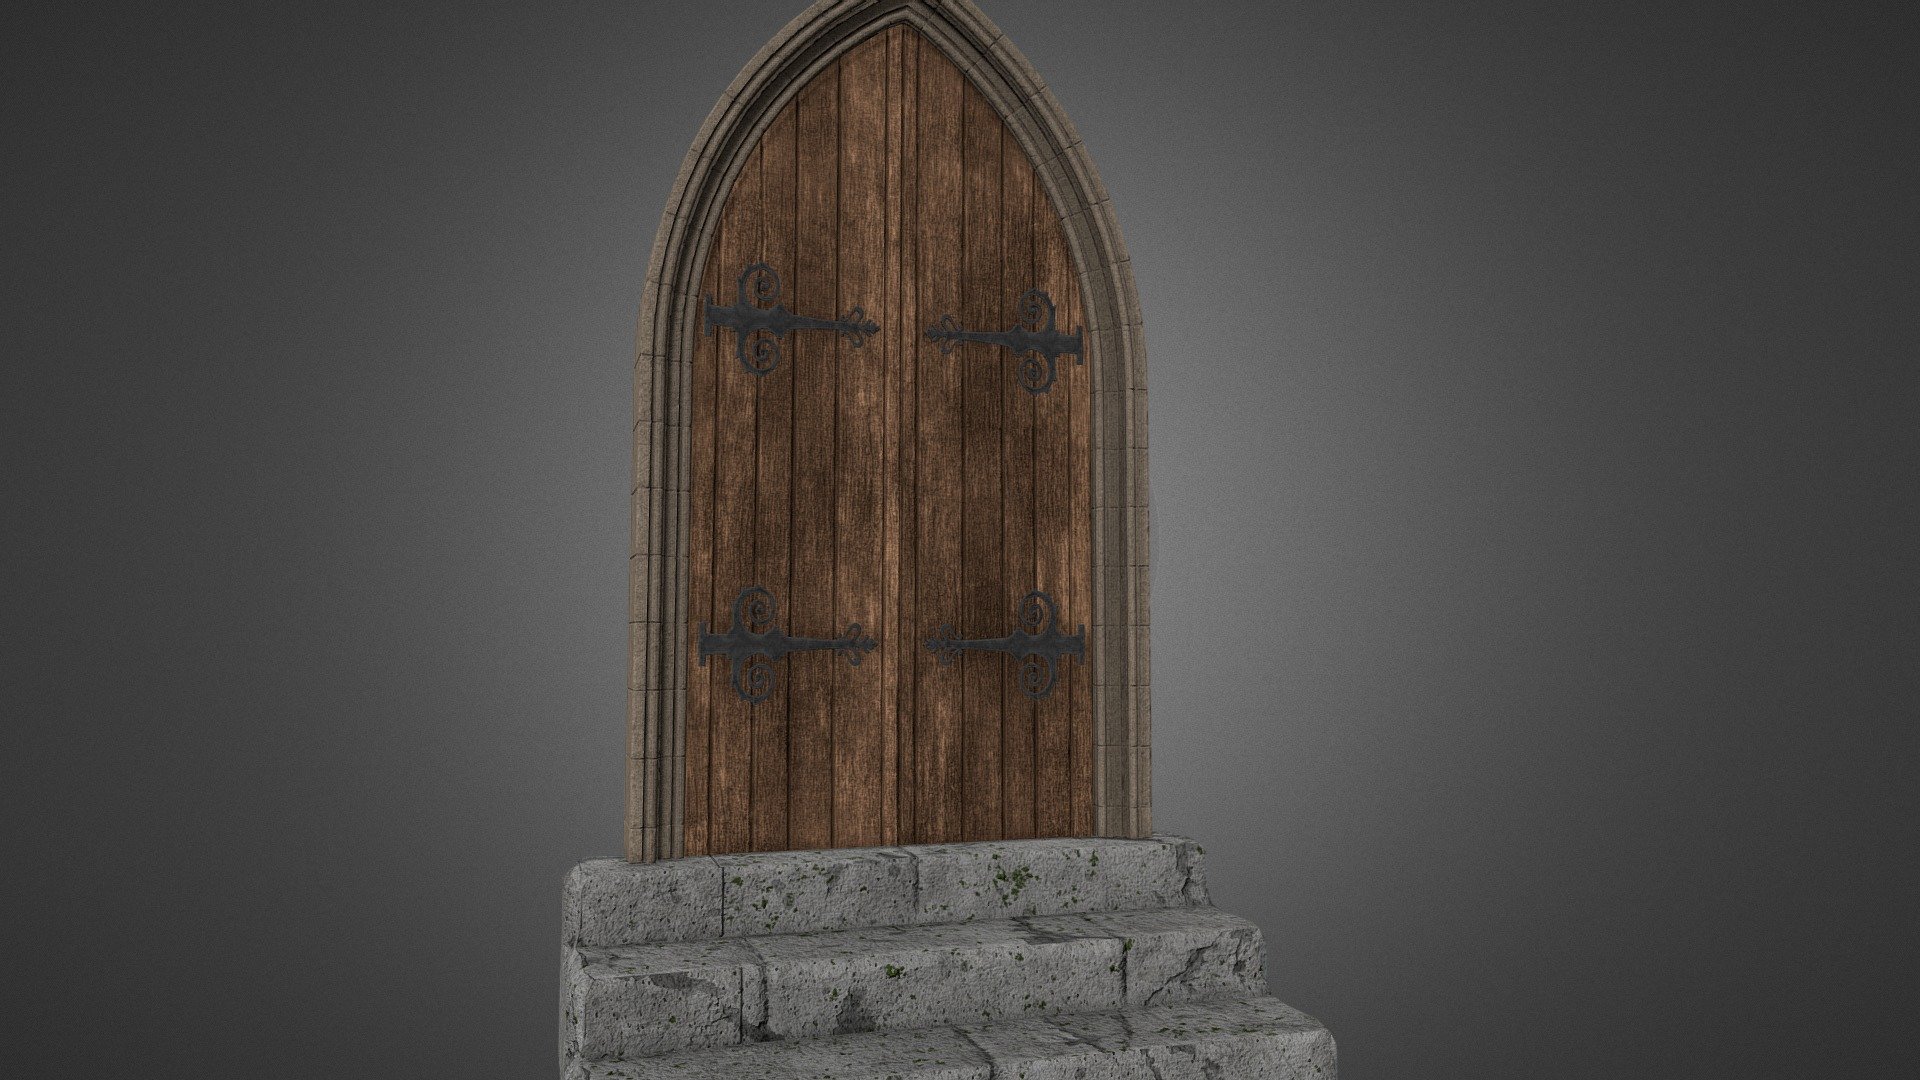 Hi! this is my very first full pipeline project, you can notice the skill grow since my first gothic casual tracery 3d model